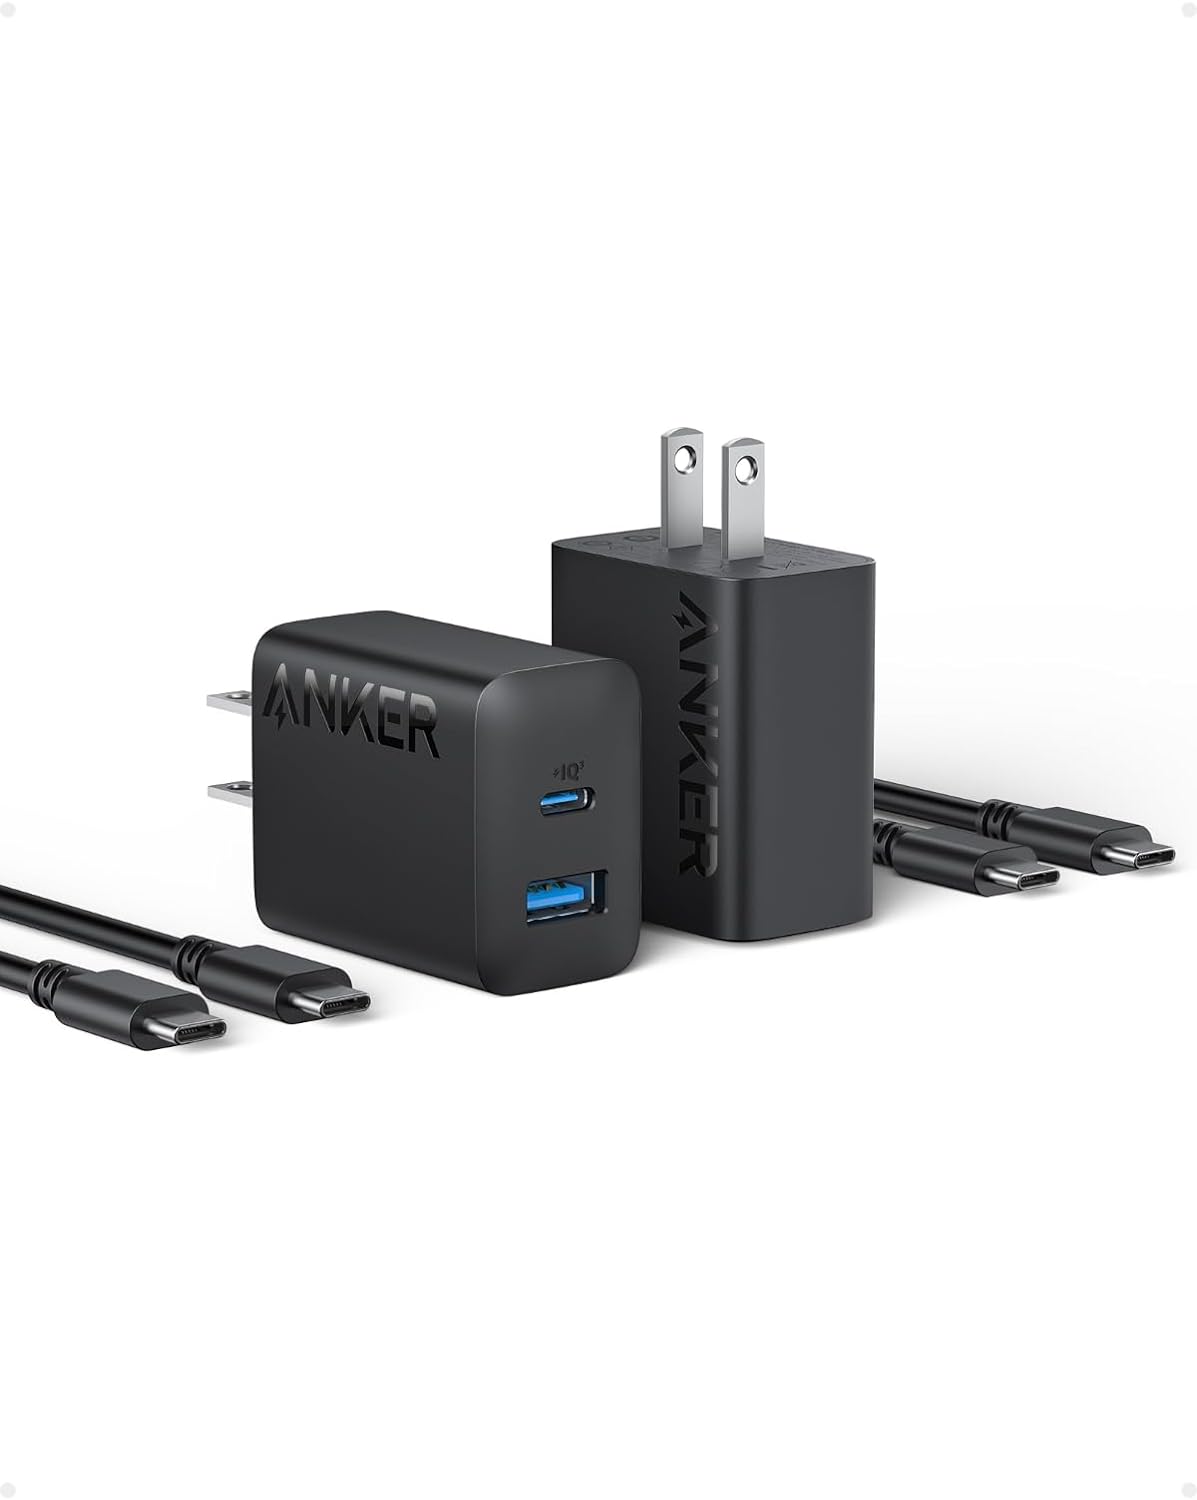 Anker Charger (20W, 2-Port) with USB-C &amp; USB-C ケーブ...